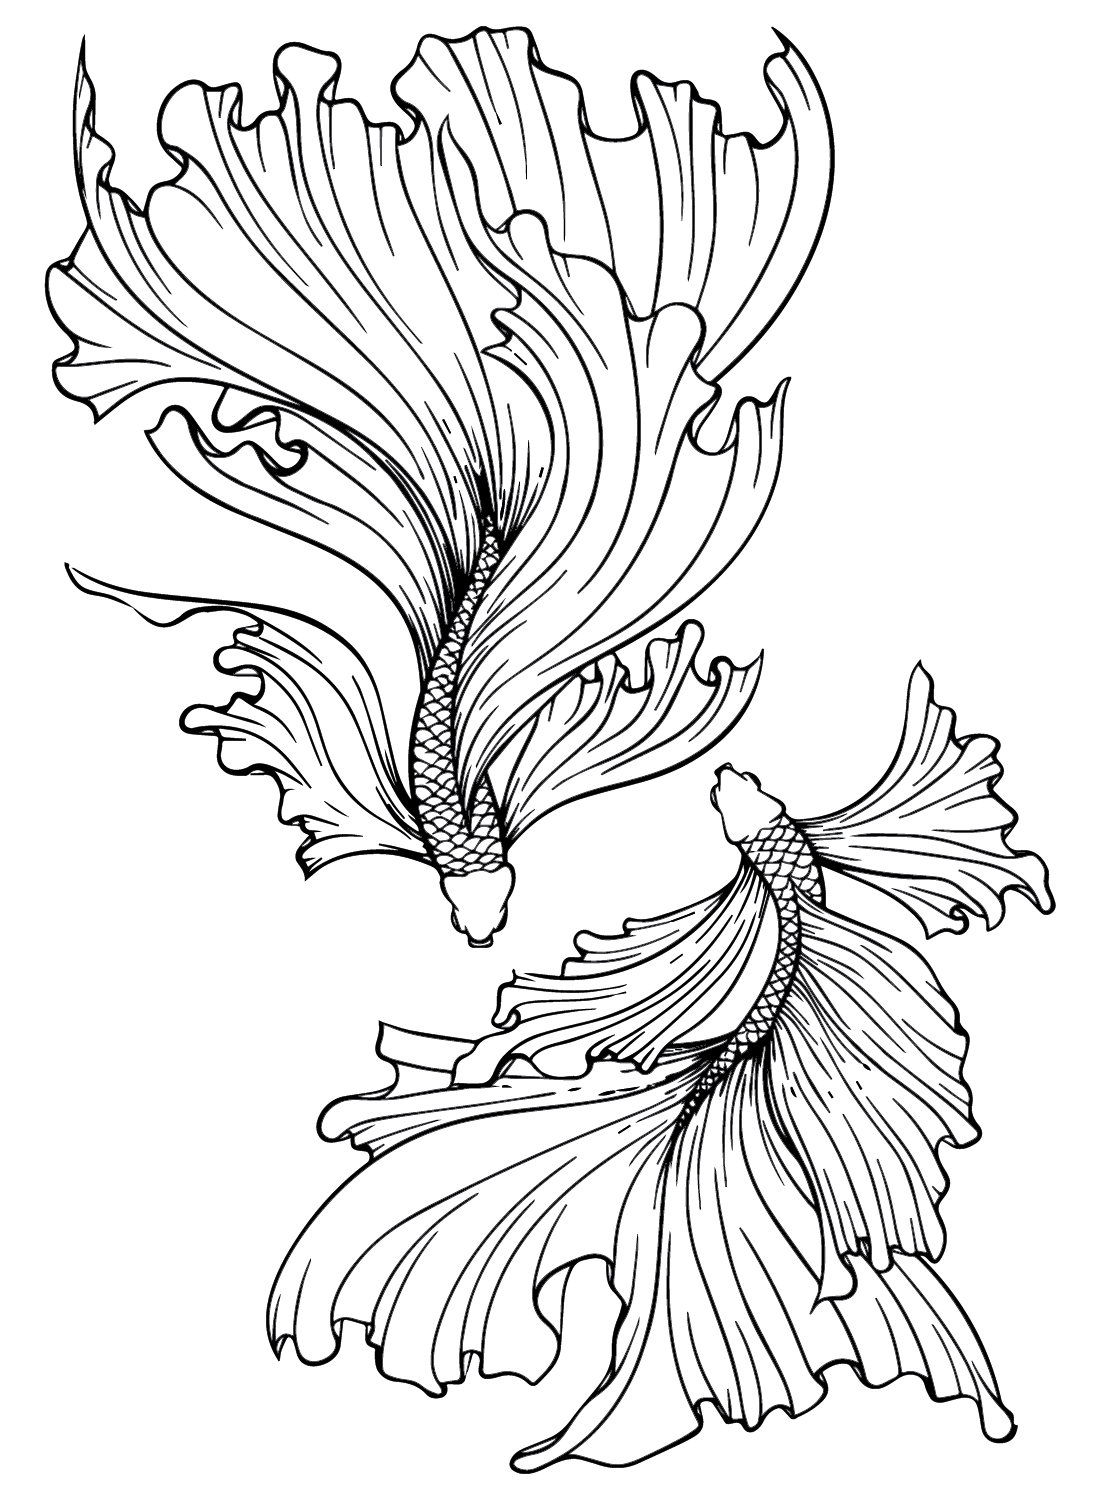 Two Betta Fish Coloring Page - Free Printable Coloring Pages